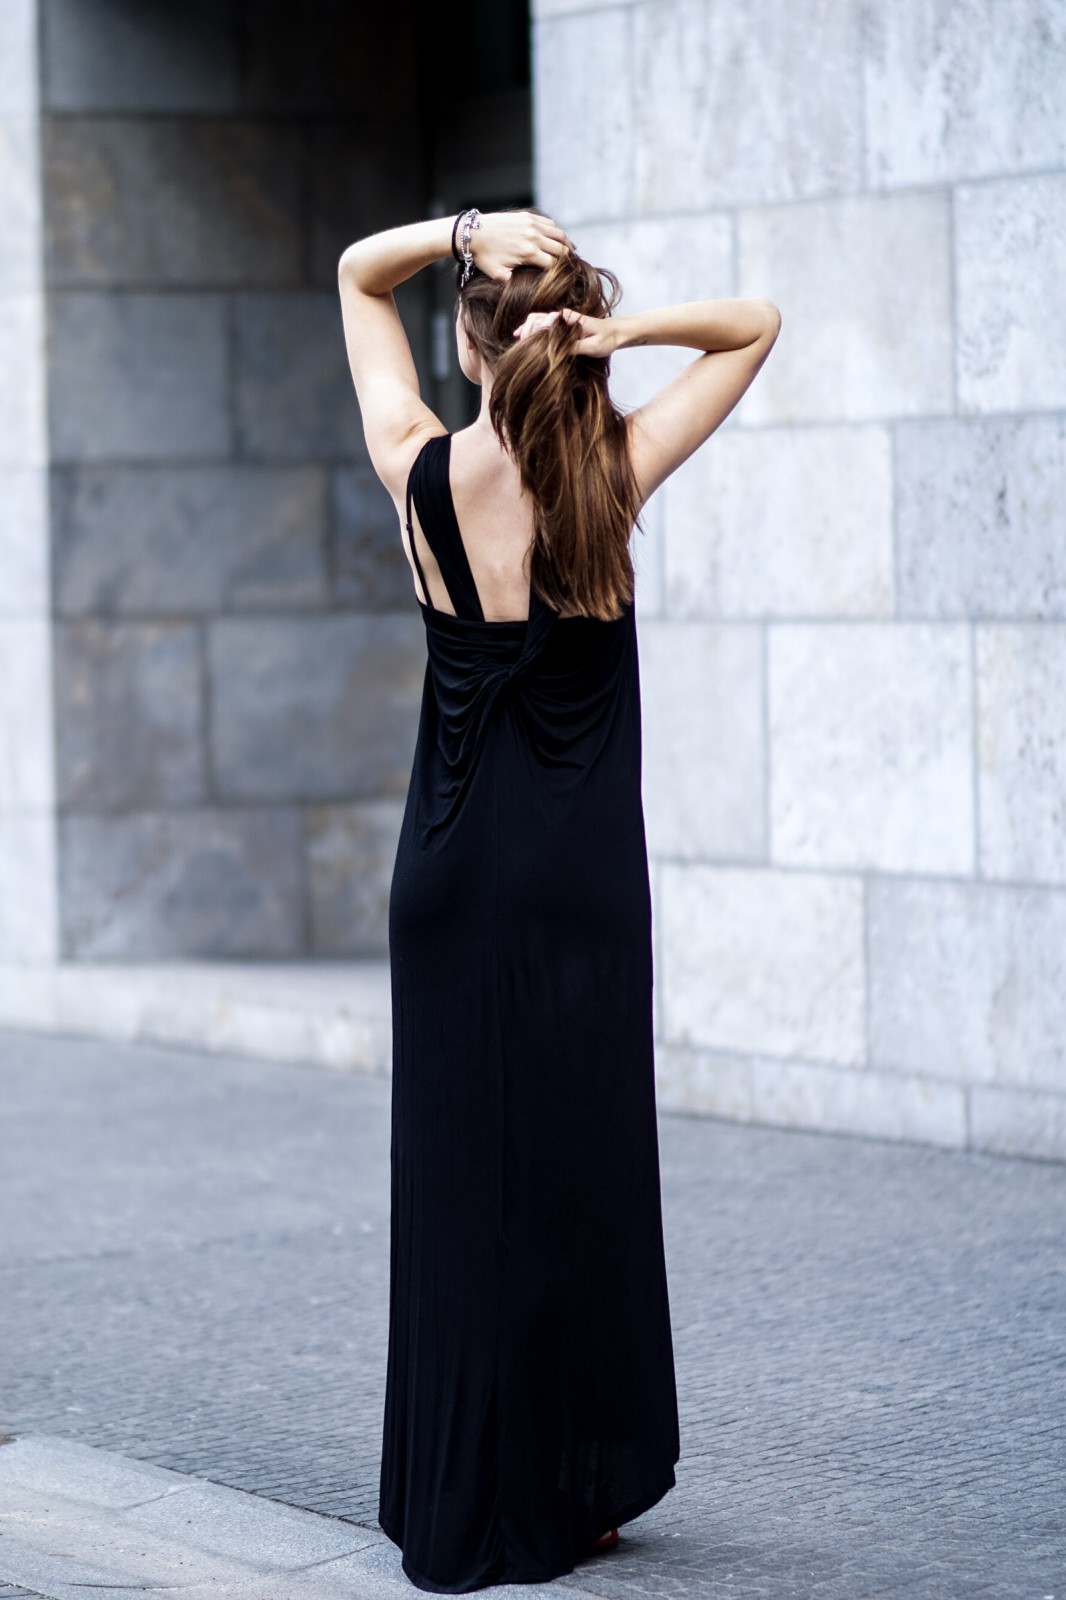 How to wear a maxi dress